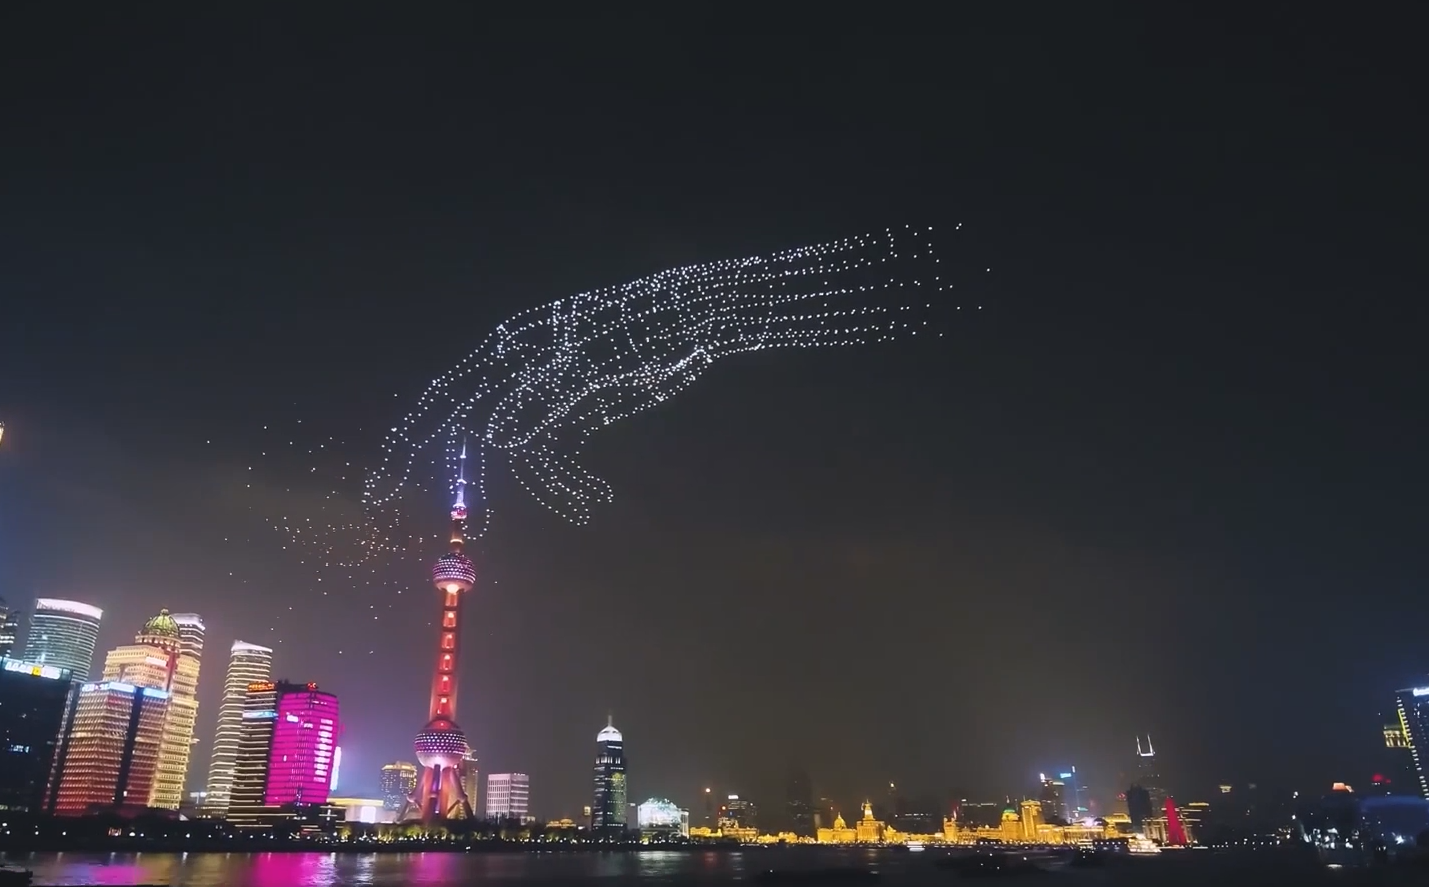 CroStars Innovation, committing to bringing cutting-edge UAV technologies to the world of
                                        creativity, is one of the world's leading drone show performers and a primary
                                        provider of swarm drone systems.